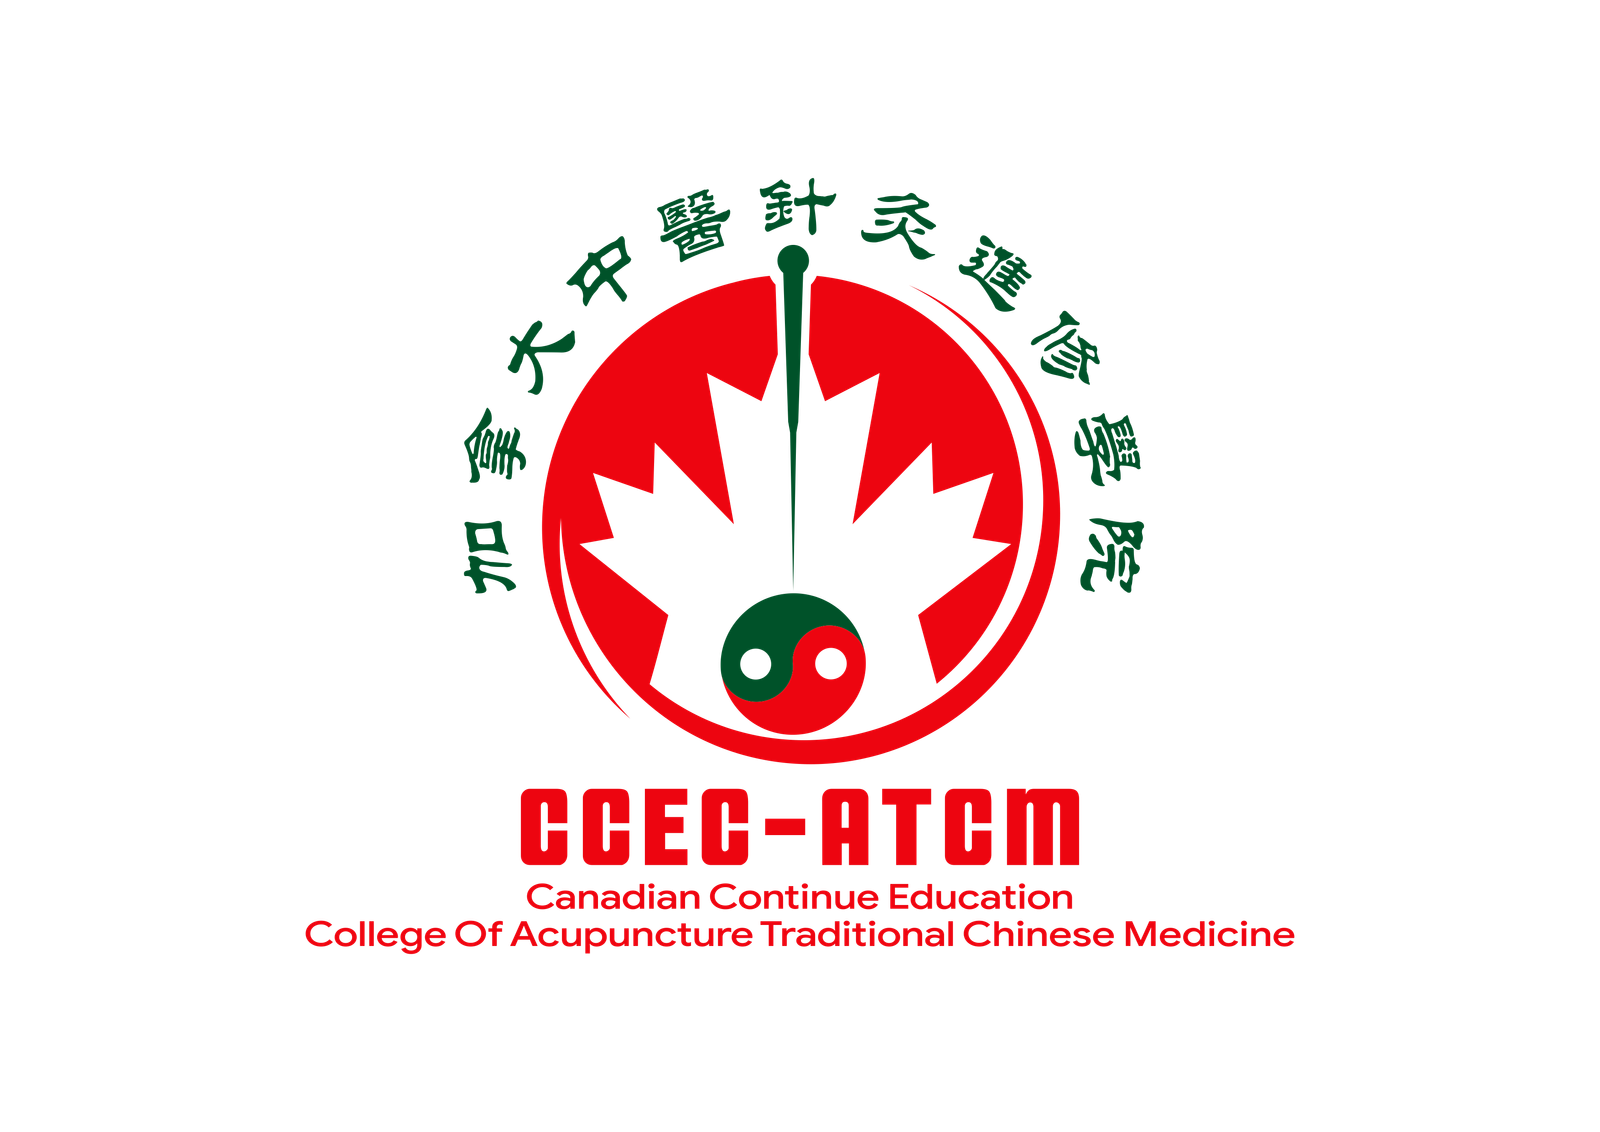 Canadian Continue Education College of Acupuncture and Chinese Medicine